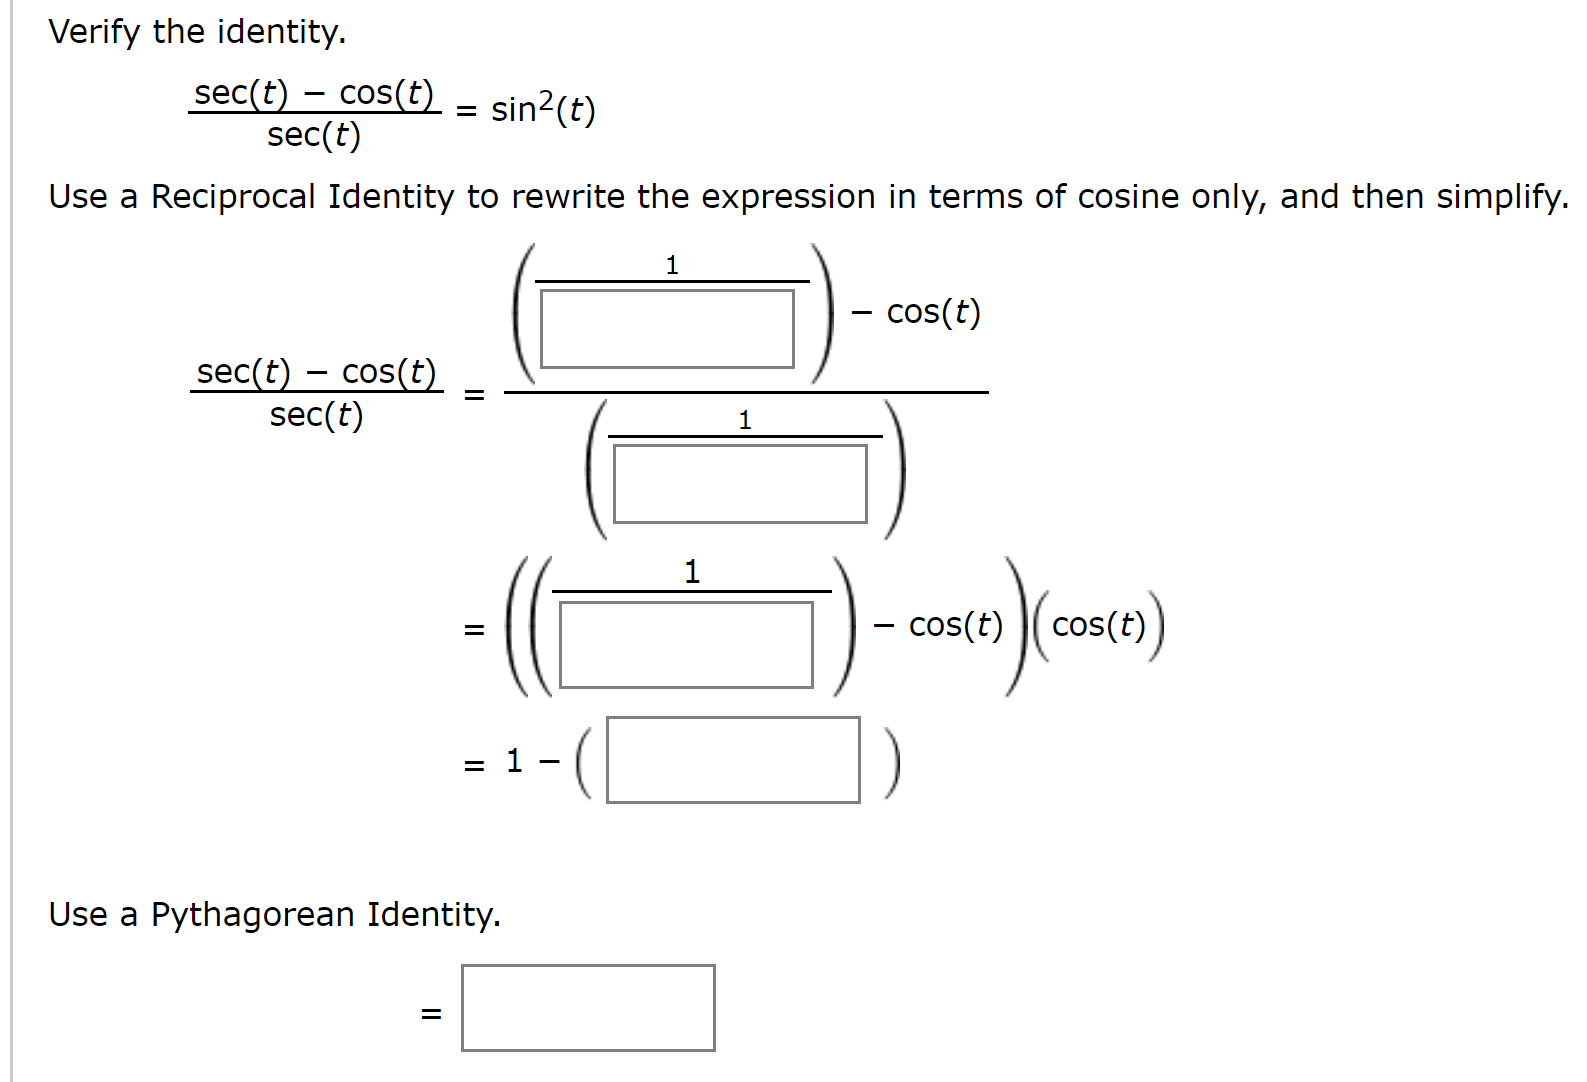 Verify the identity.
sec(t) – cos(t) = sin²(t)
sec(t)
Use a Reciprocal Identity to rewrite the expression in terms of cosine only, and then simplify.
1
cos(t)
sec(t) – cos(t)
sec(t)
- cos(t) cos(t))
Use a Pythagorean Identity.
II
